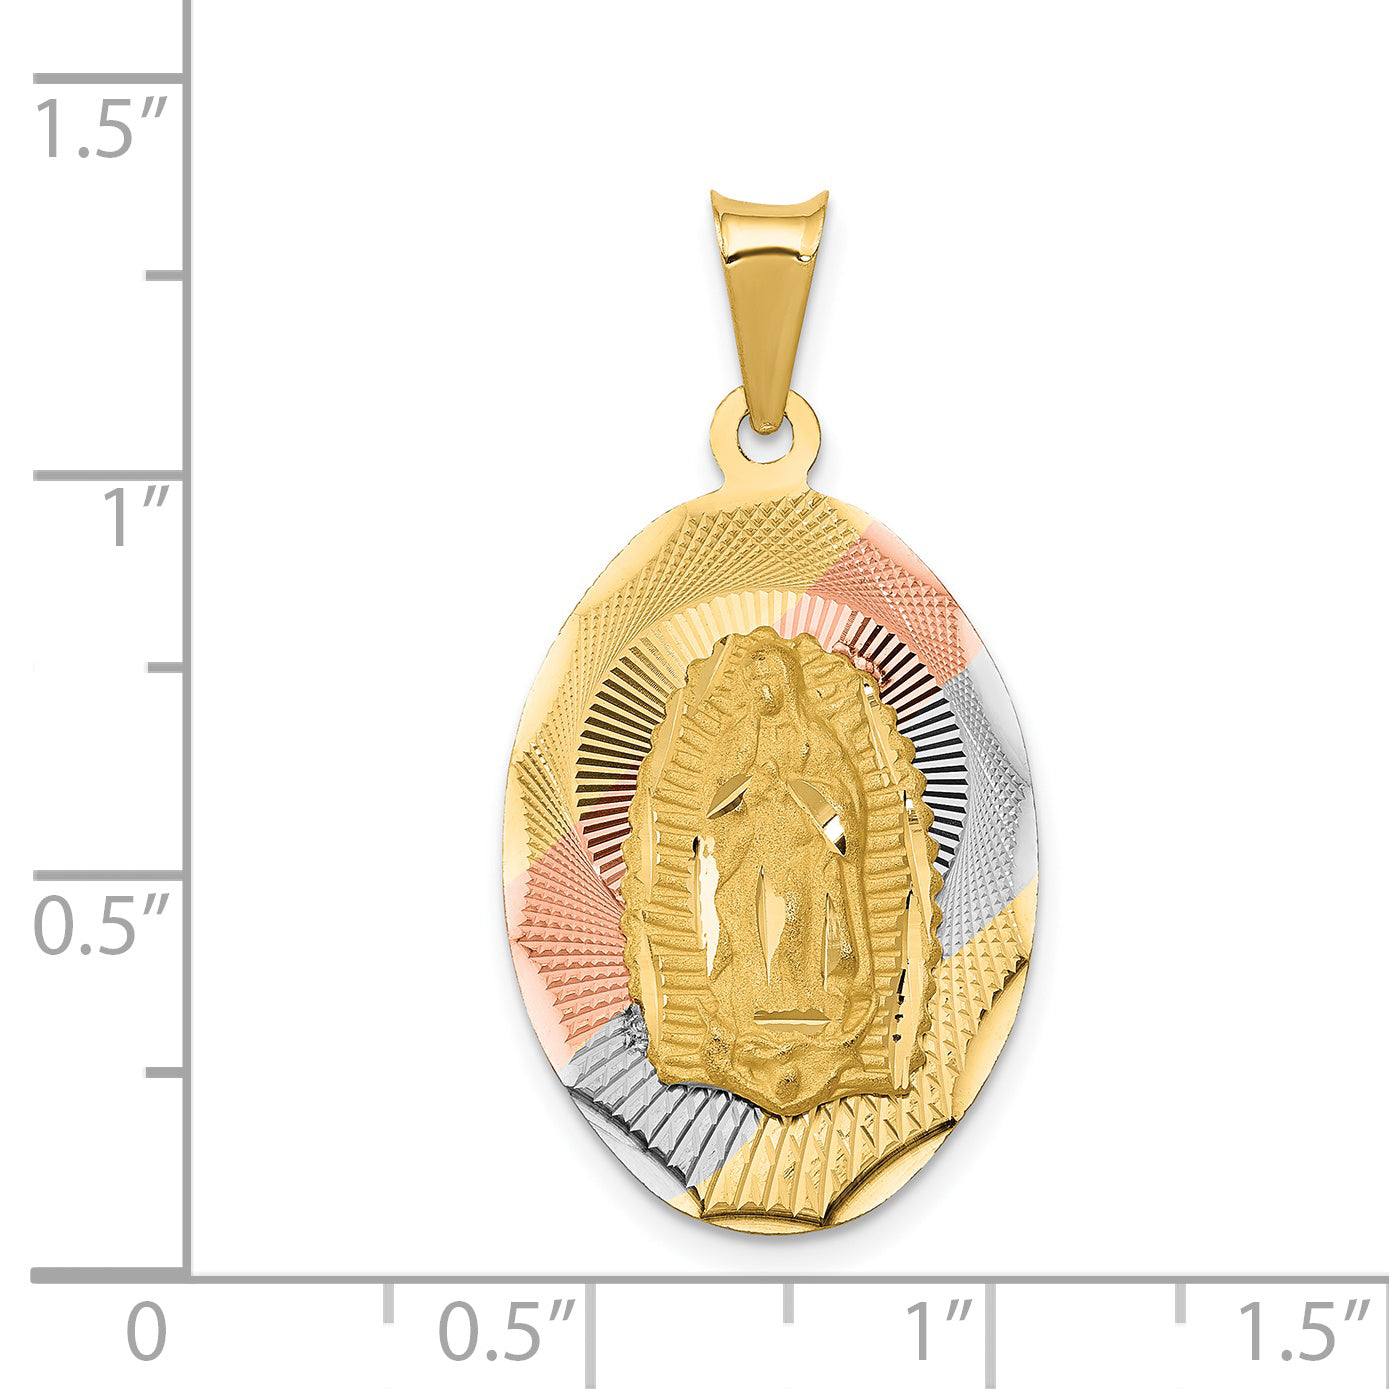 14K w/Rhodium D/C Lady Of Guadalupe Oval Pendant